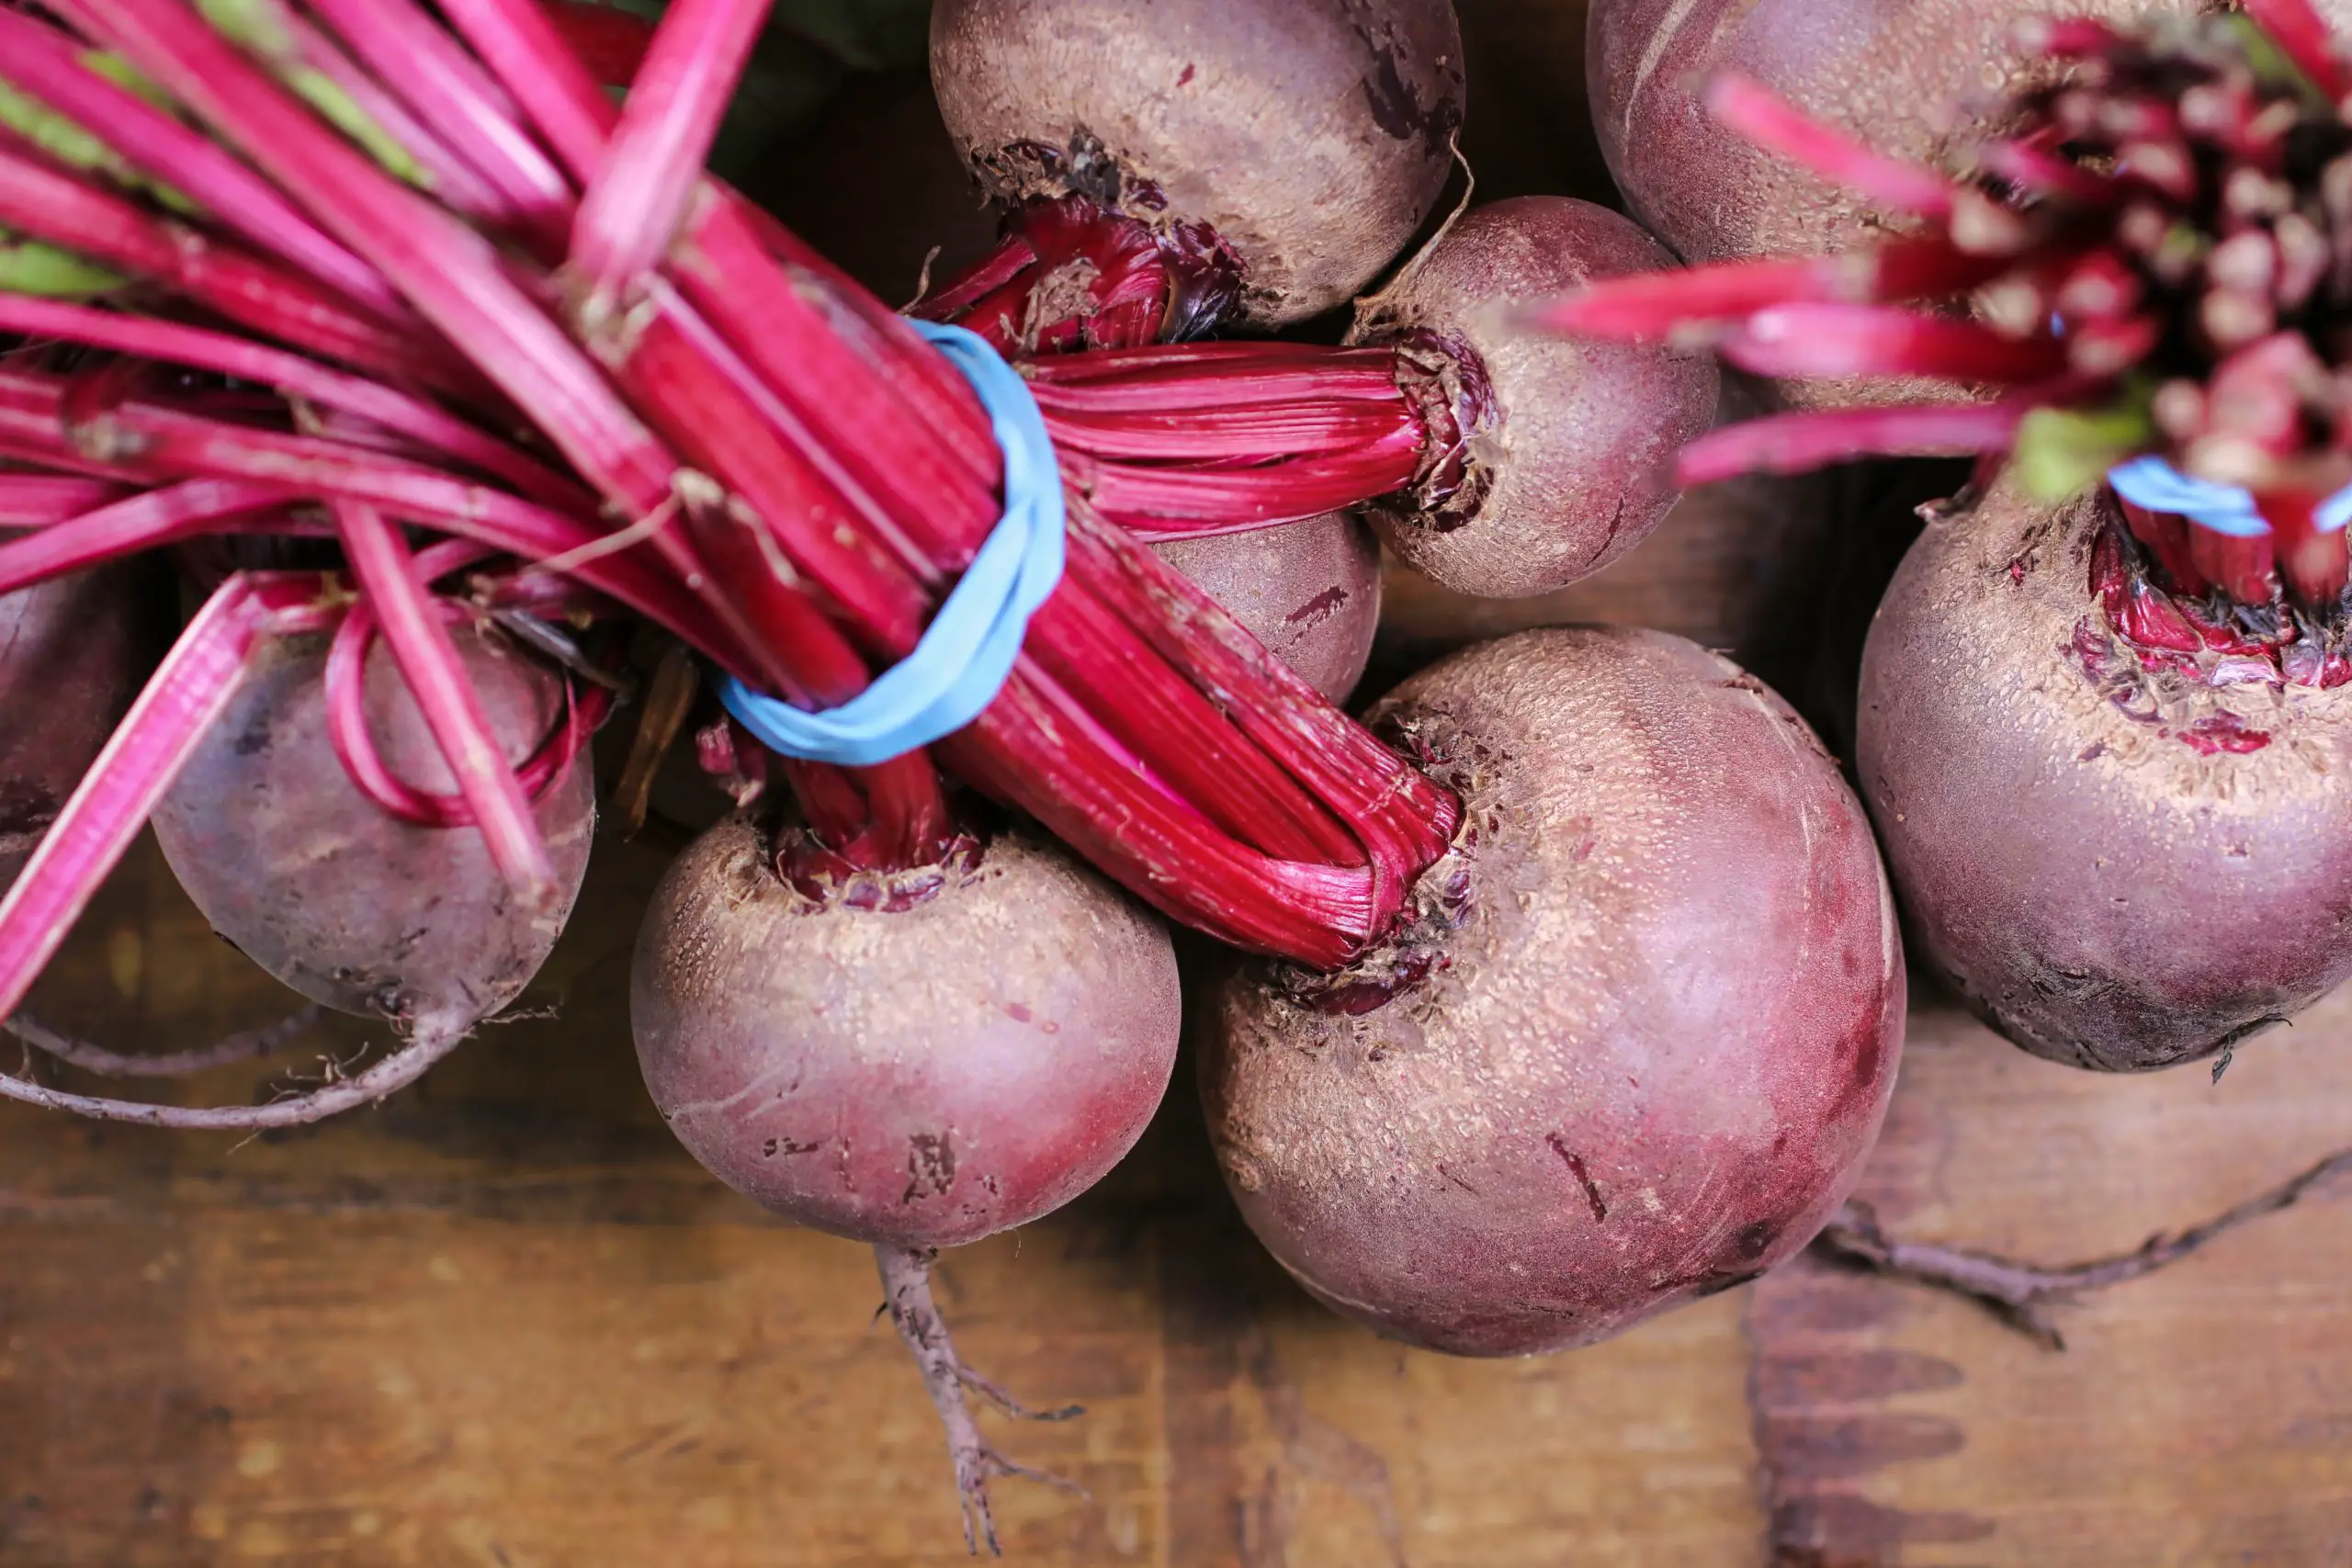 Guide to Growing Your Own Beetroot